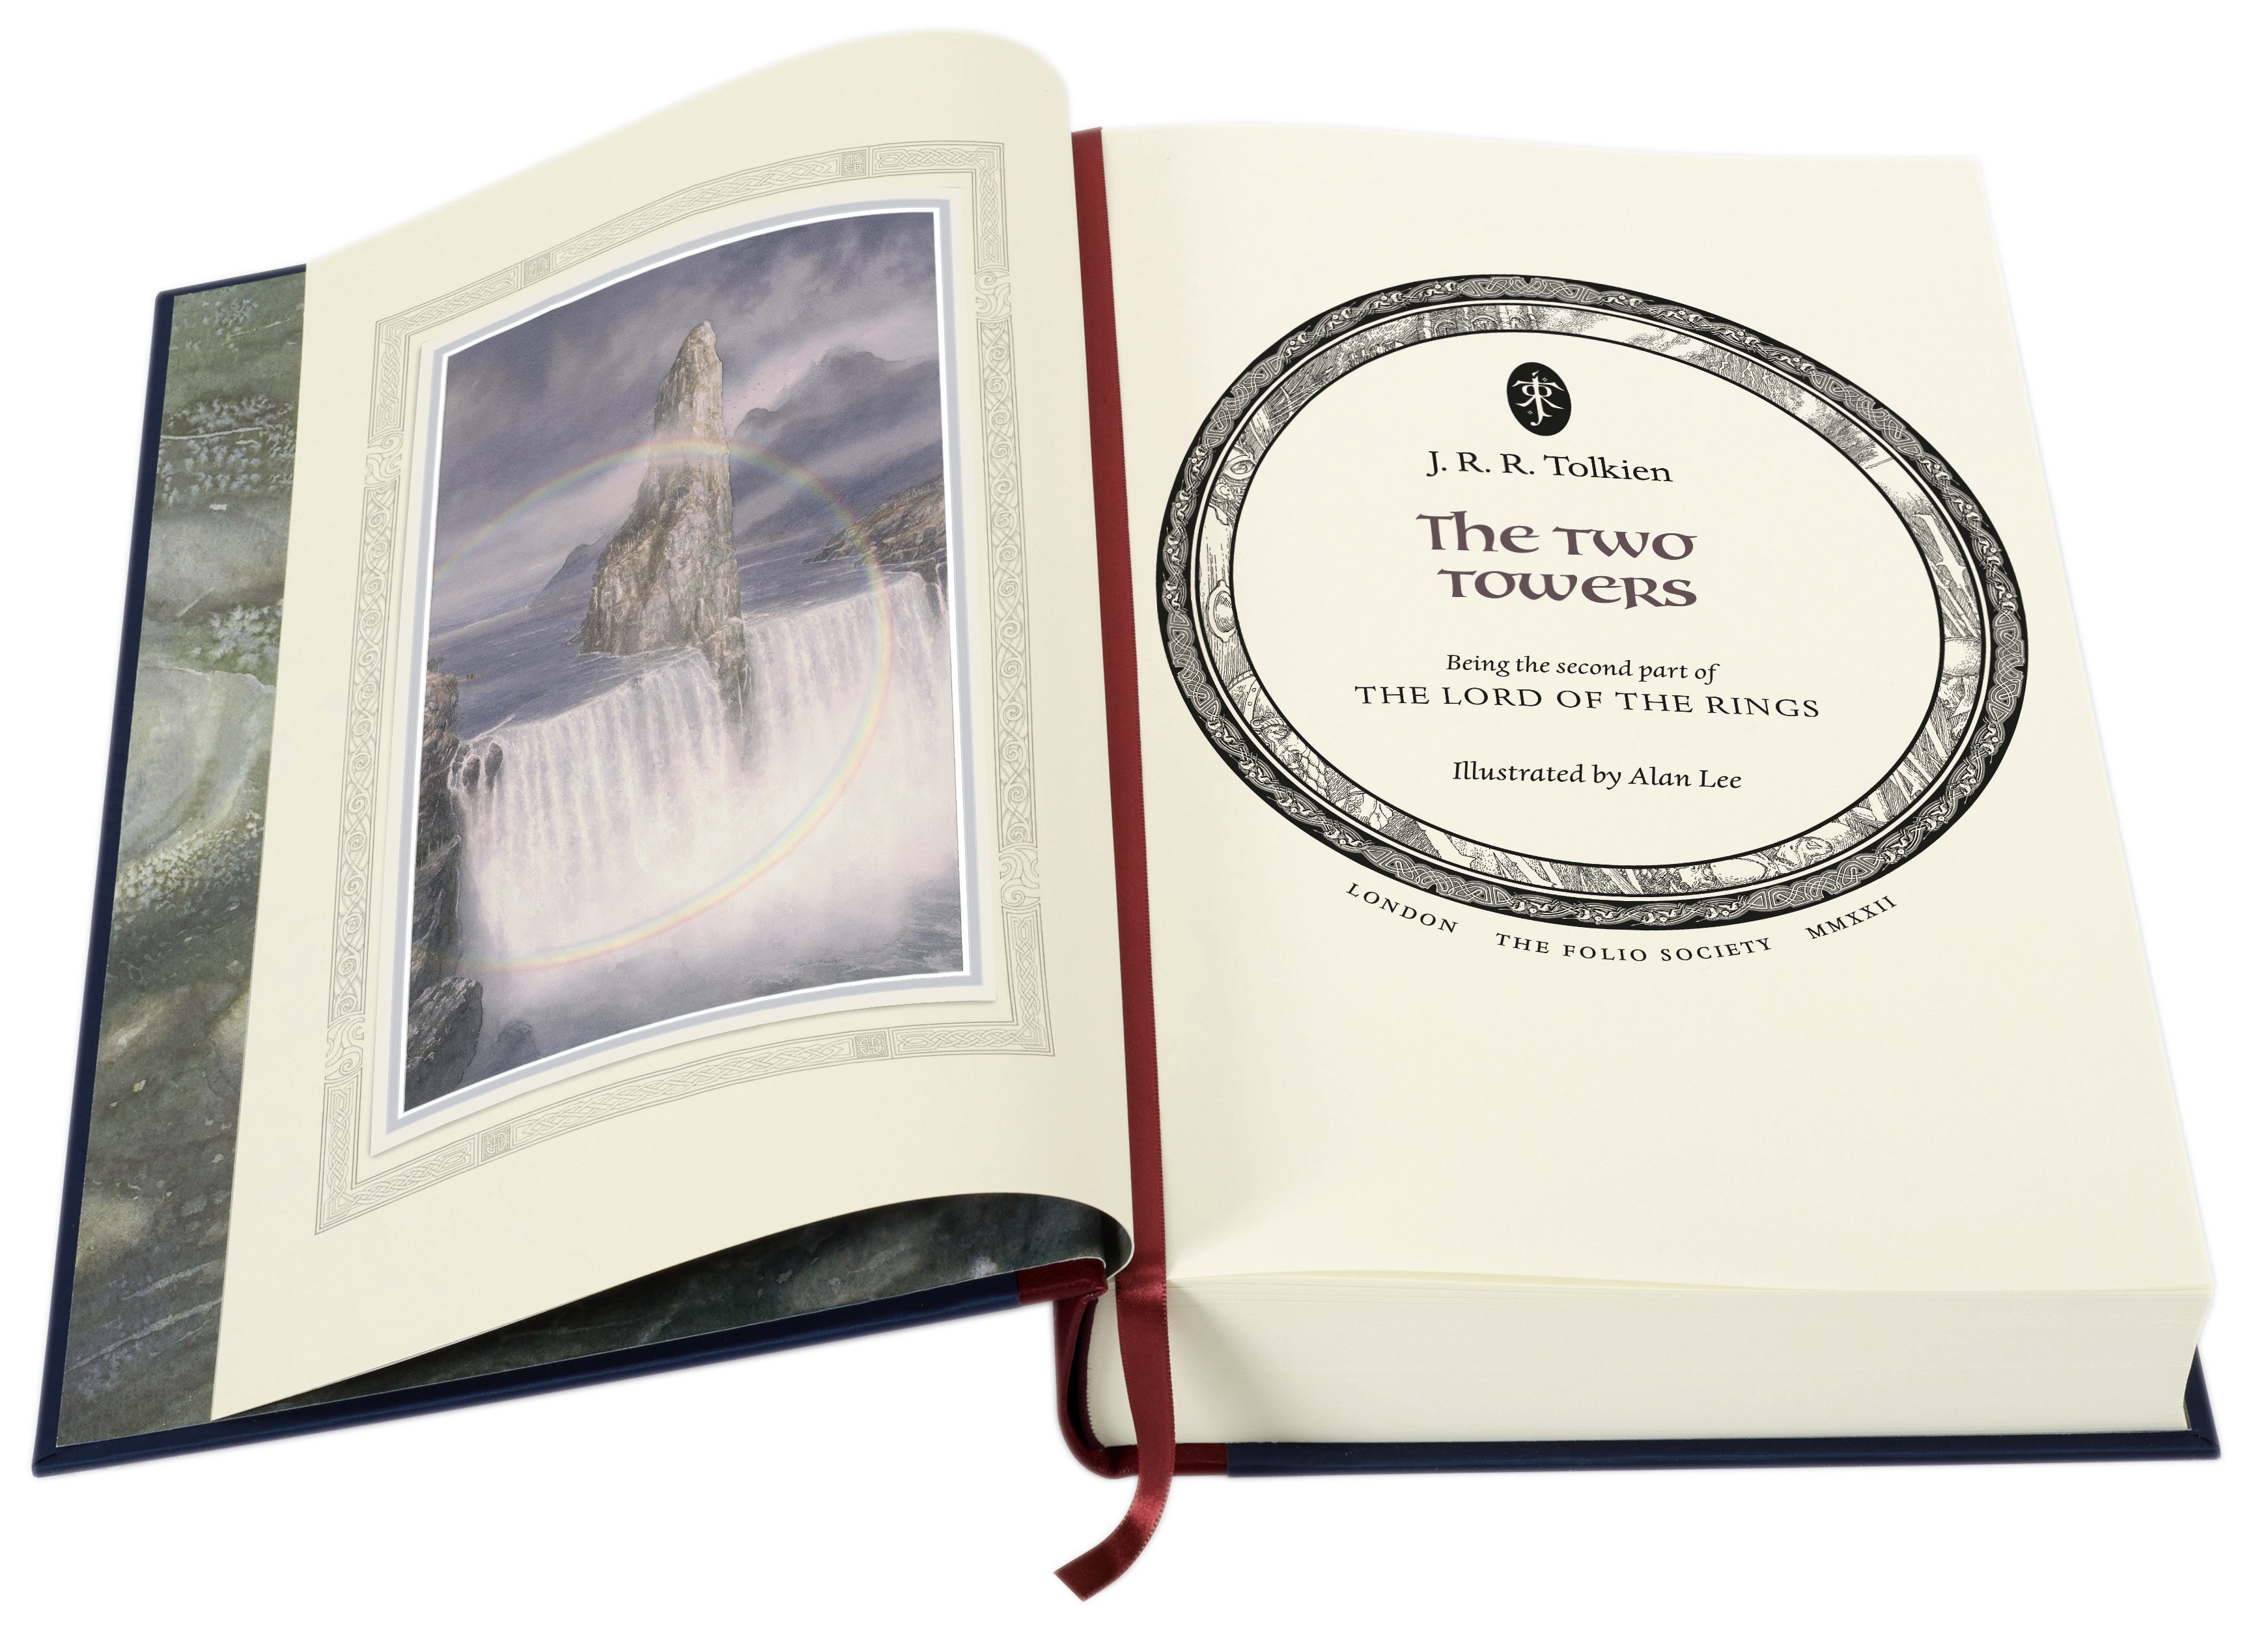 Image: ©Alan Lee for The Folio Society’s edition of J.R.R. Tolkien’s The Lord of the Rings.